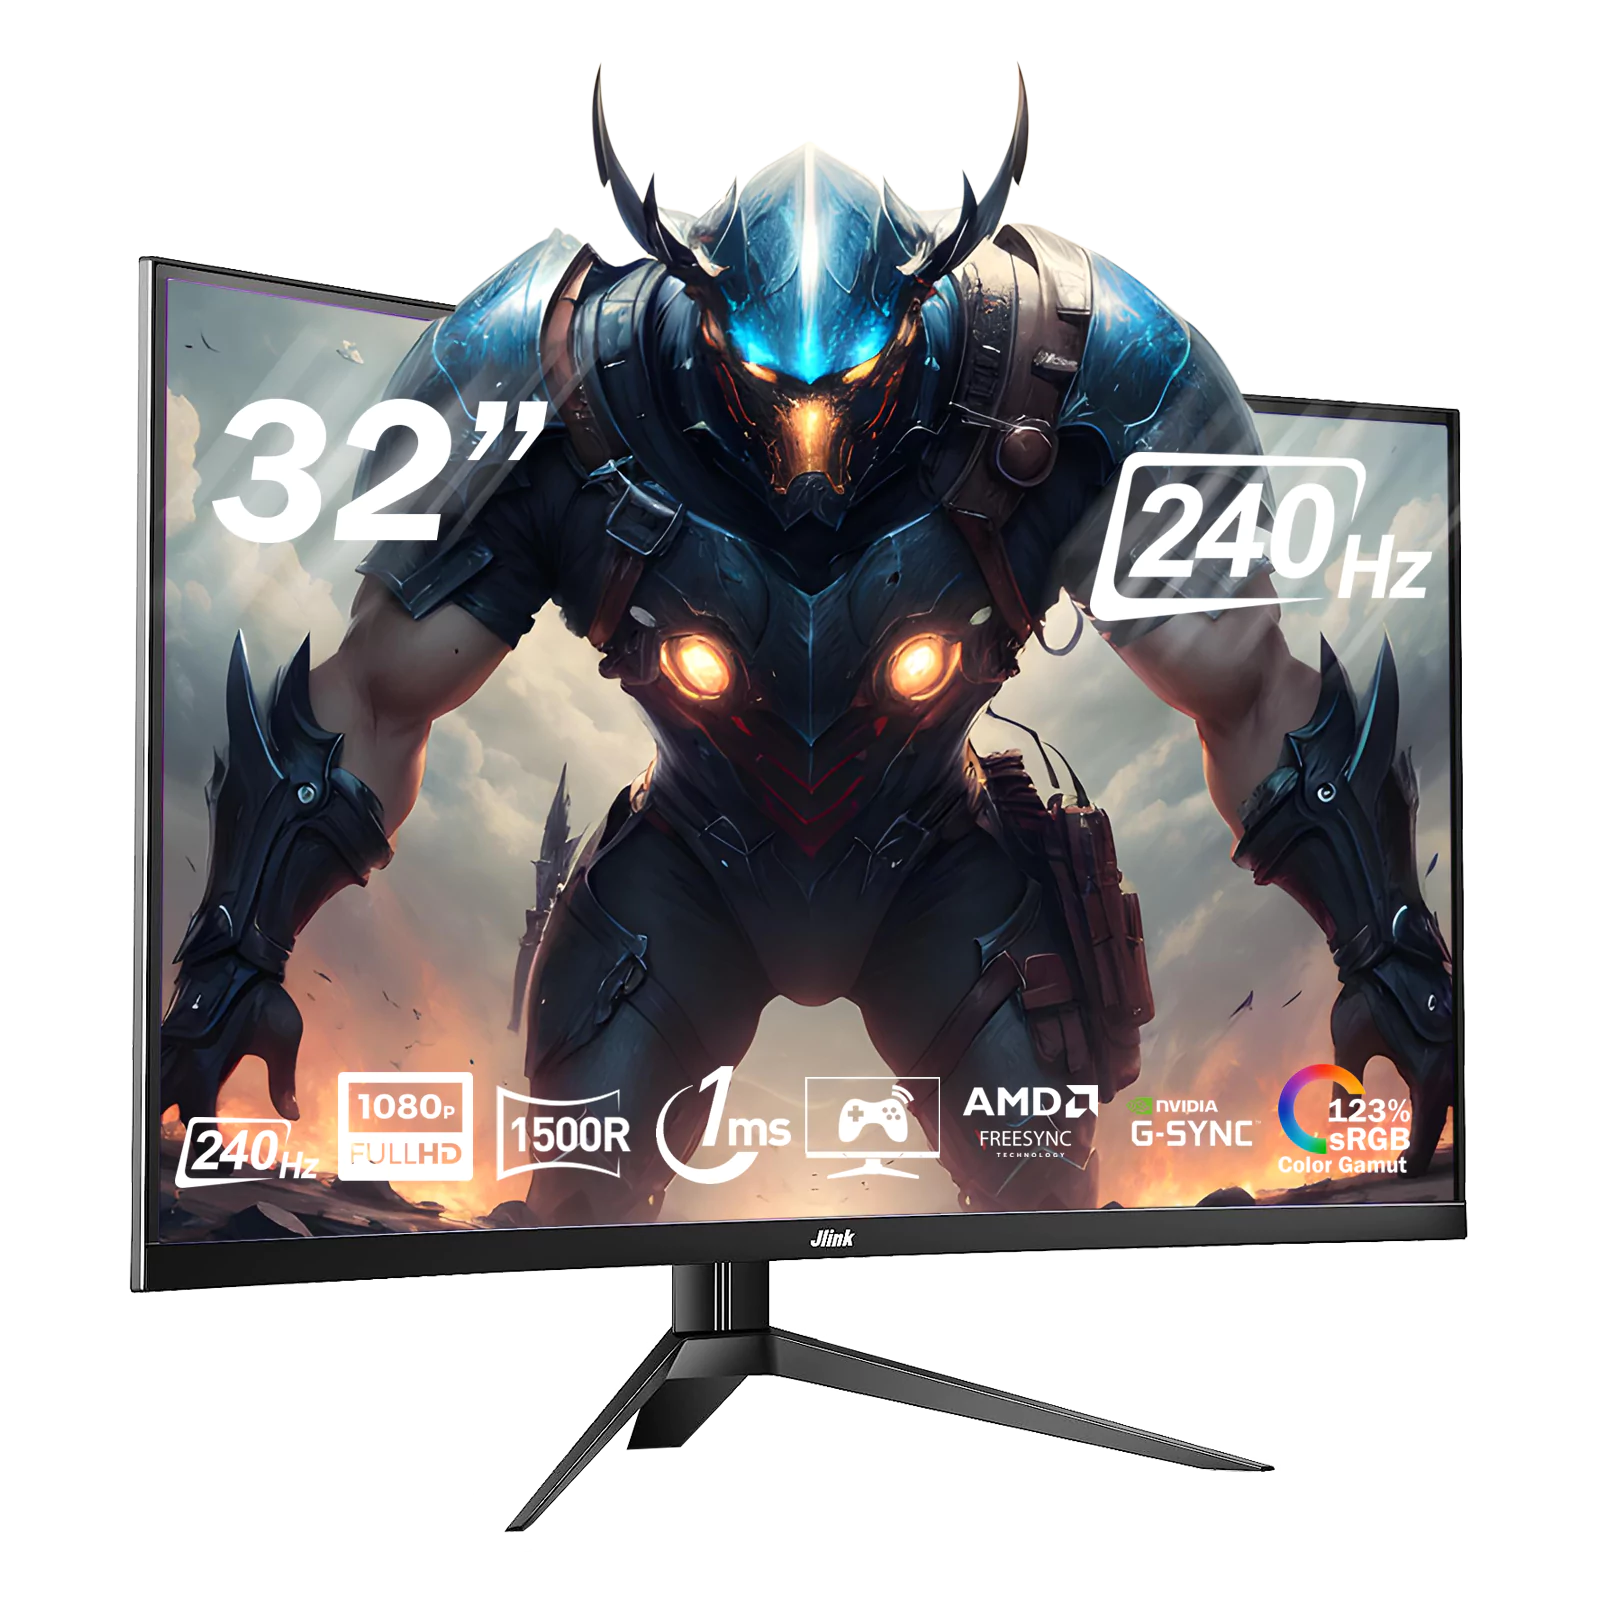 32" Curved Gaming Monitor 1080P FHD 240Hz - F32FR1K